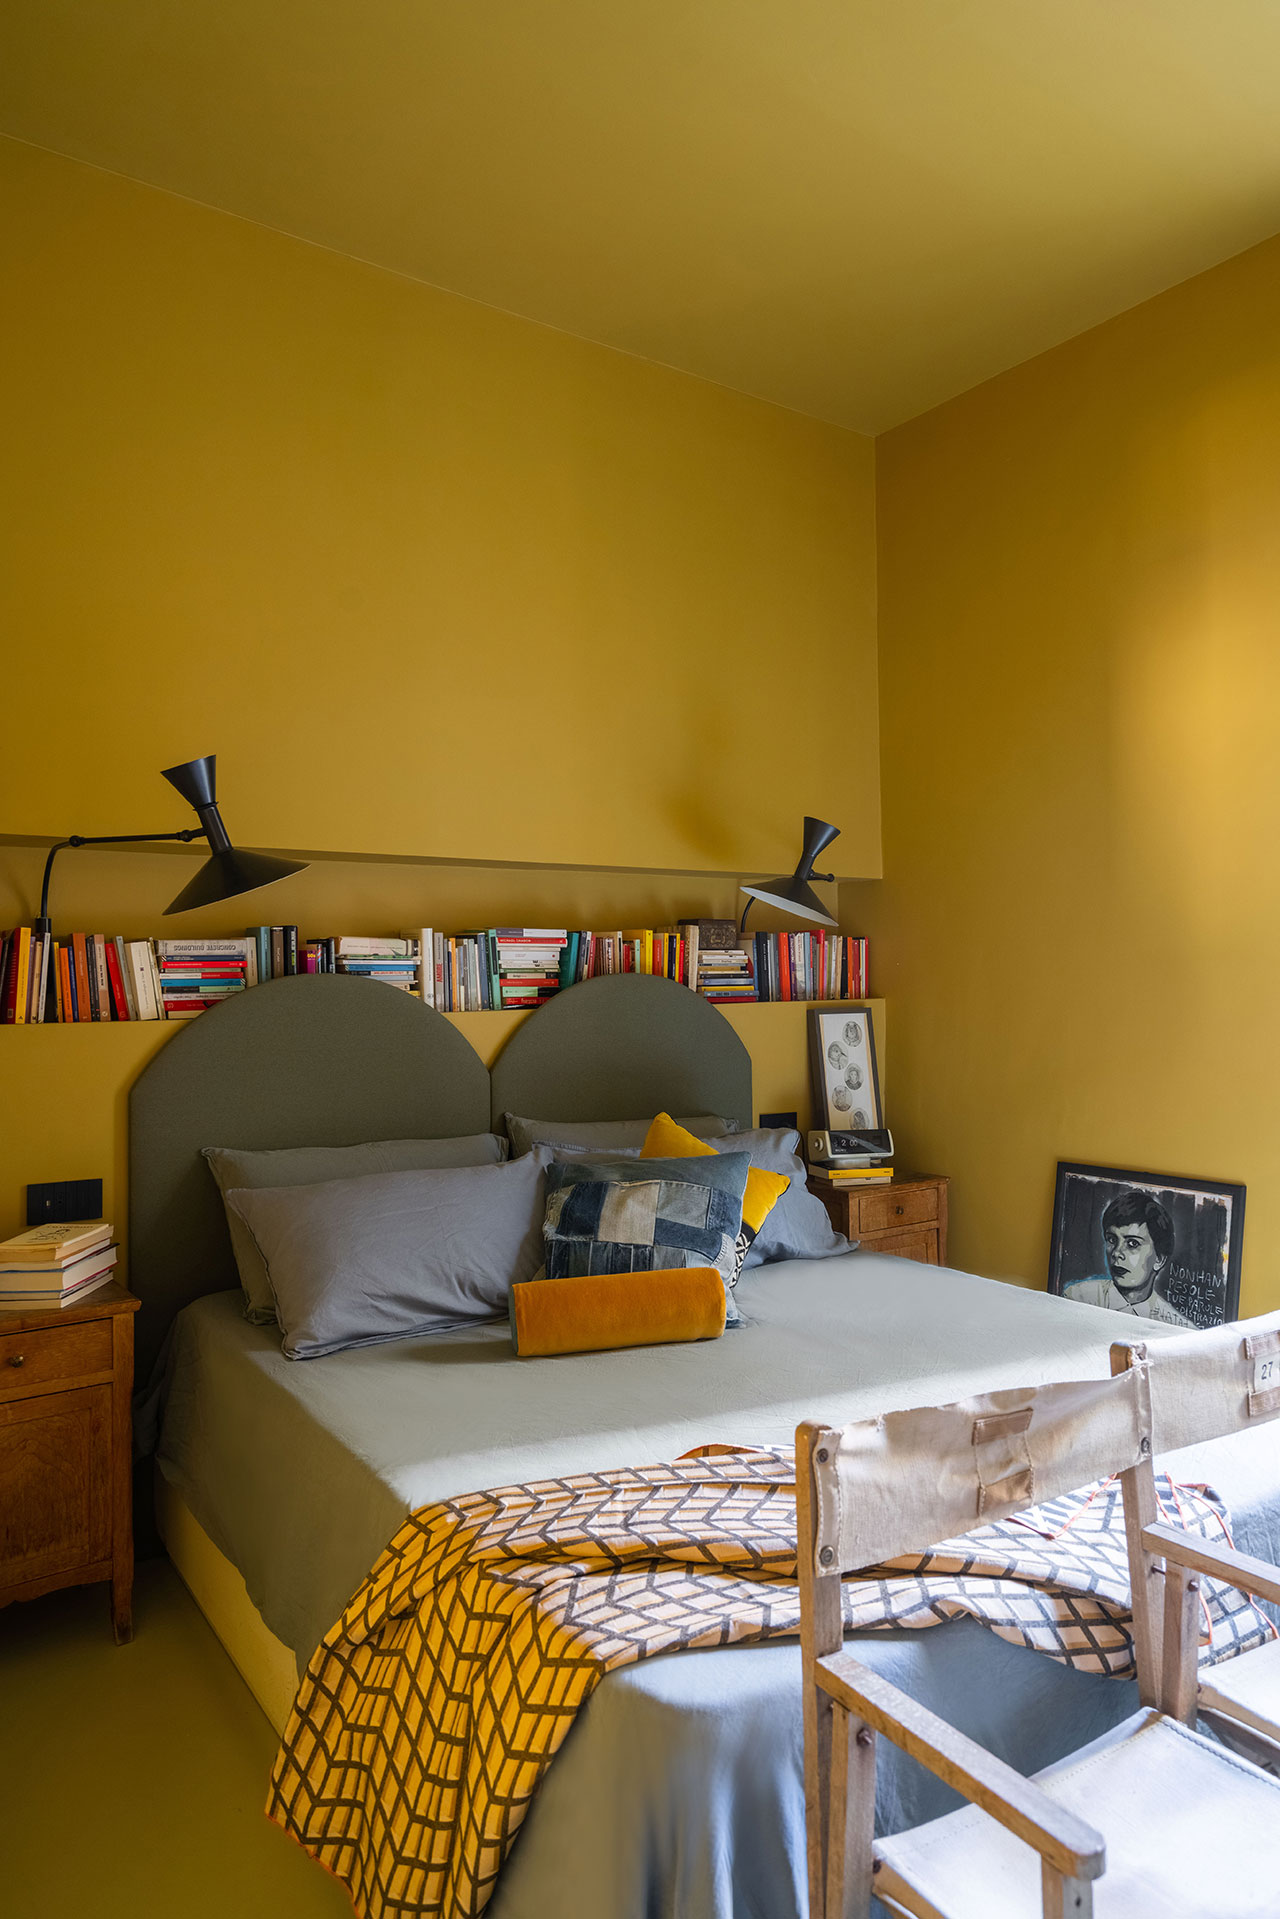 Wall lights: Lampe de Marseille by Le Corbusier for Nemo; Bedside tables and set of folding chairs: vintage; Headboard: custom designed by STUDIOTAMAT and covered with Vescom fabrics.
Photography © Seven H. Zhang.